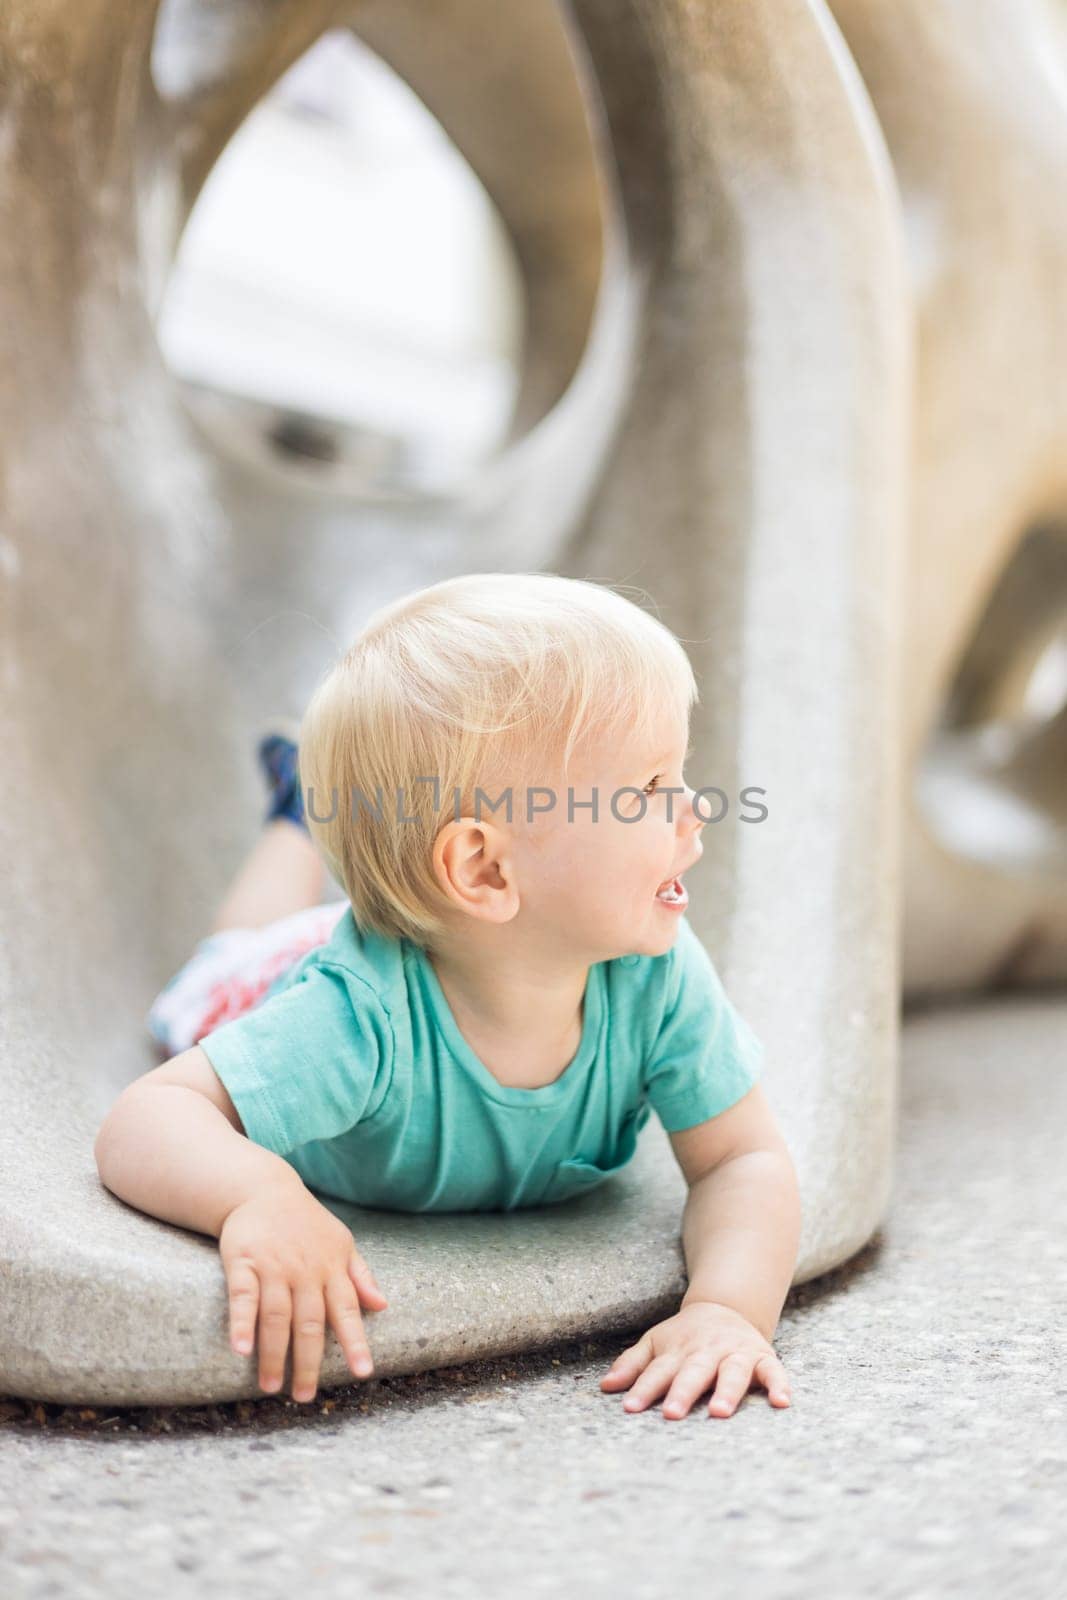 Child playing on outdoor playground. Toddler plays on school or kindergarten yard. Active kid on stone sculpured slide. Healthy summer activity for children. Little boy climbing outdoors